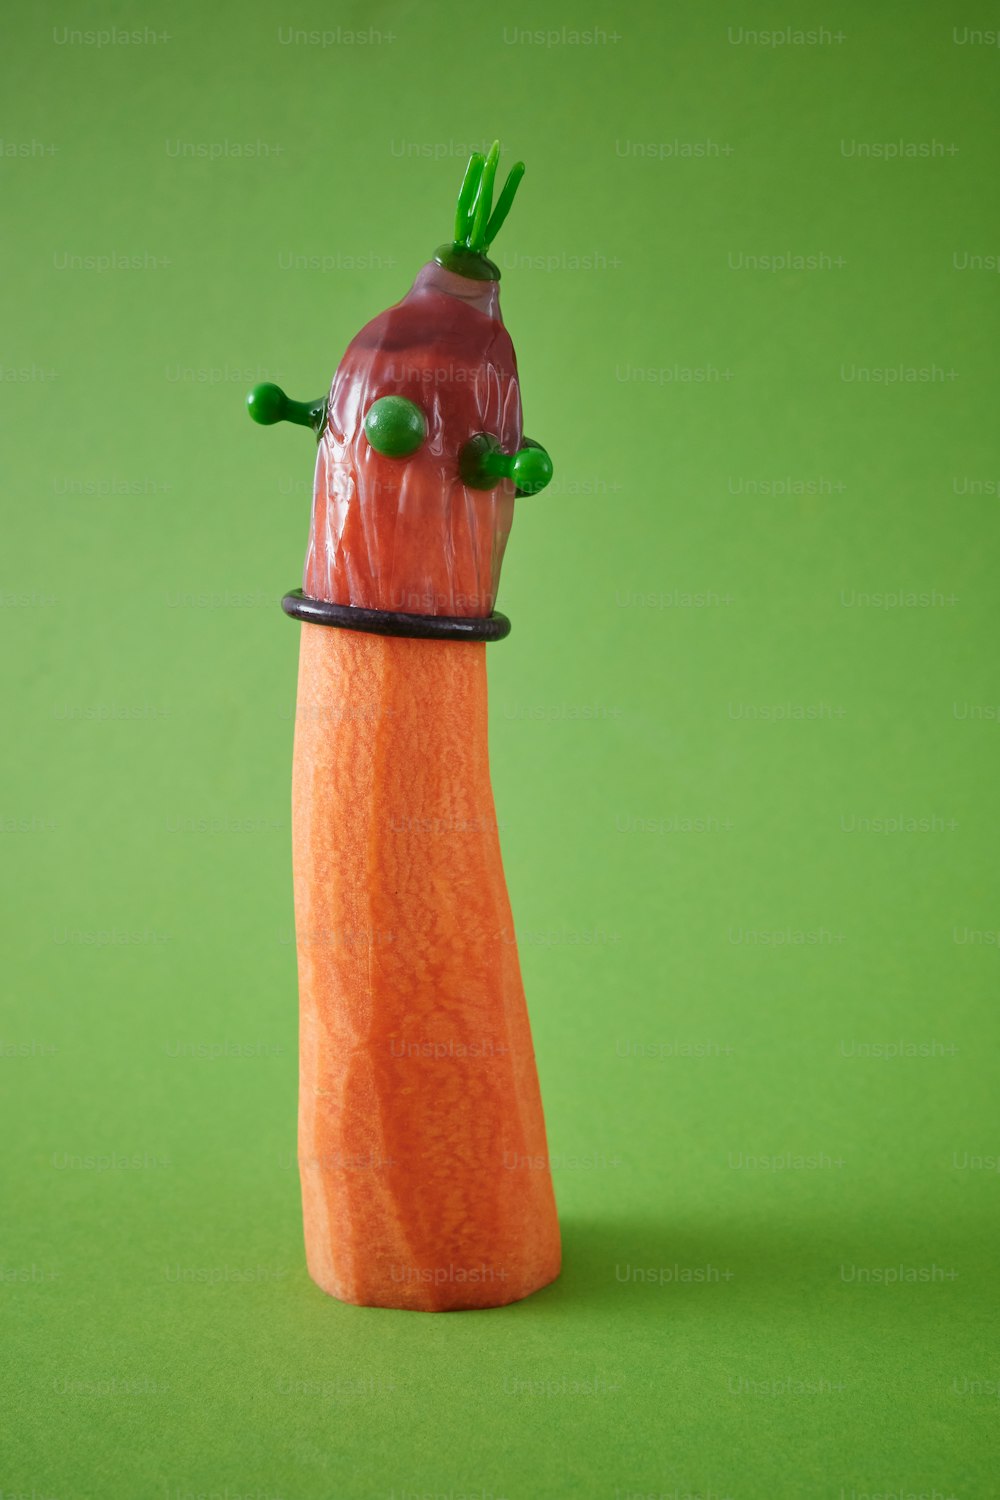 a carrot with a green stem sticking out of it